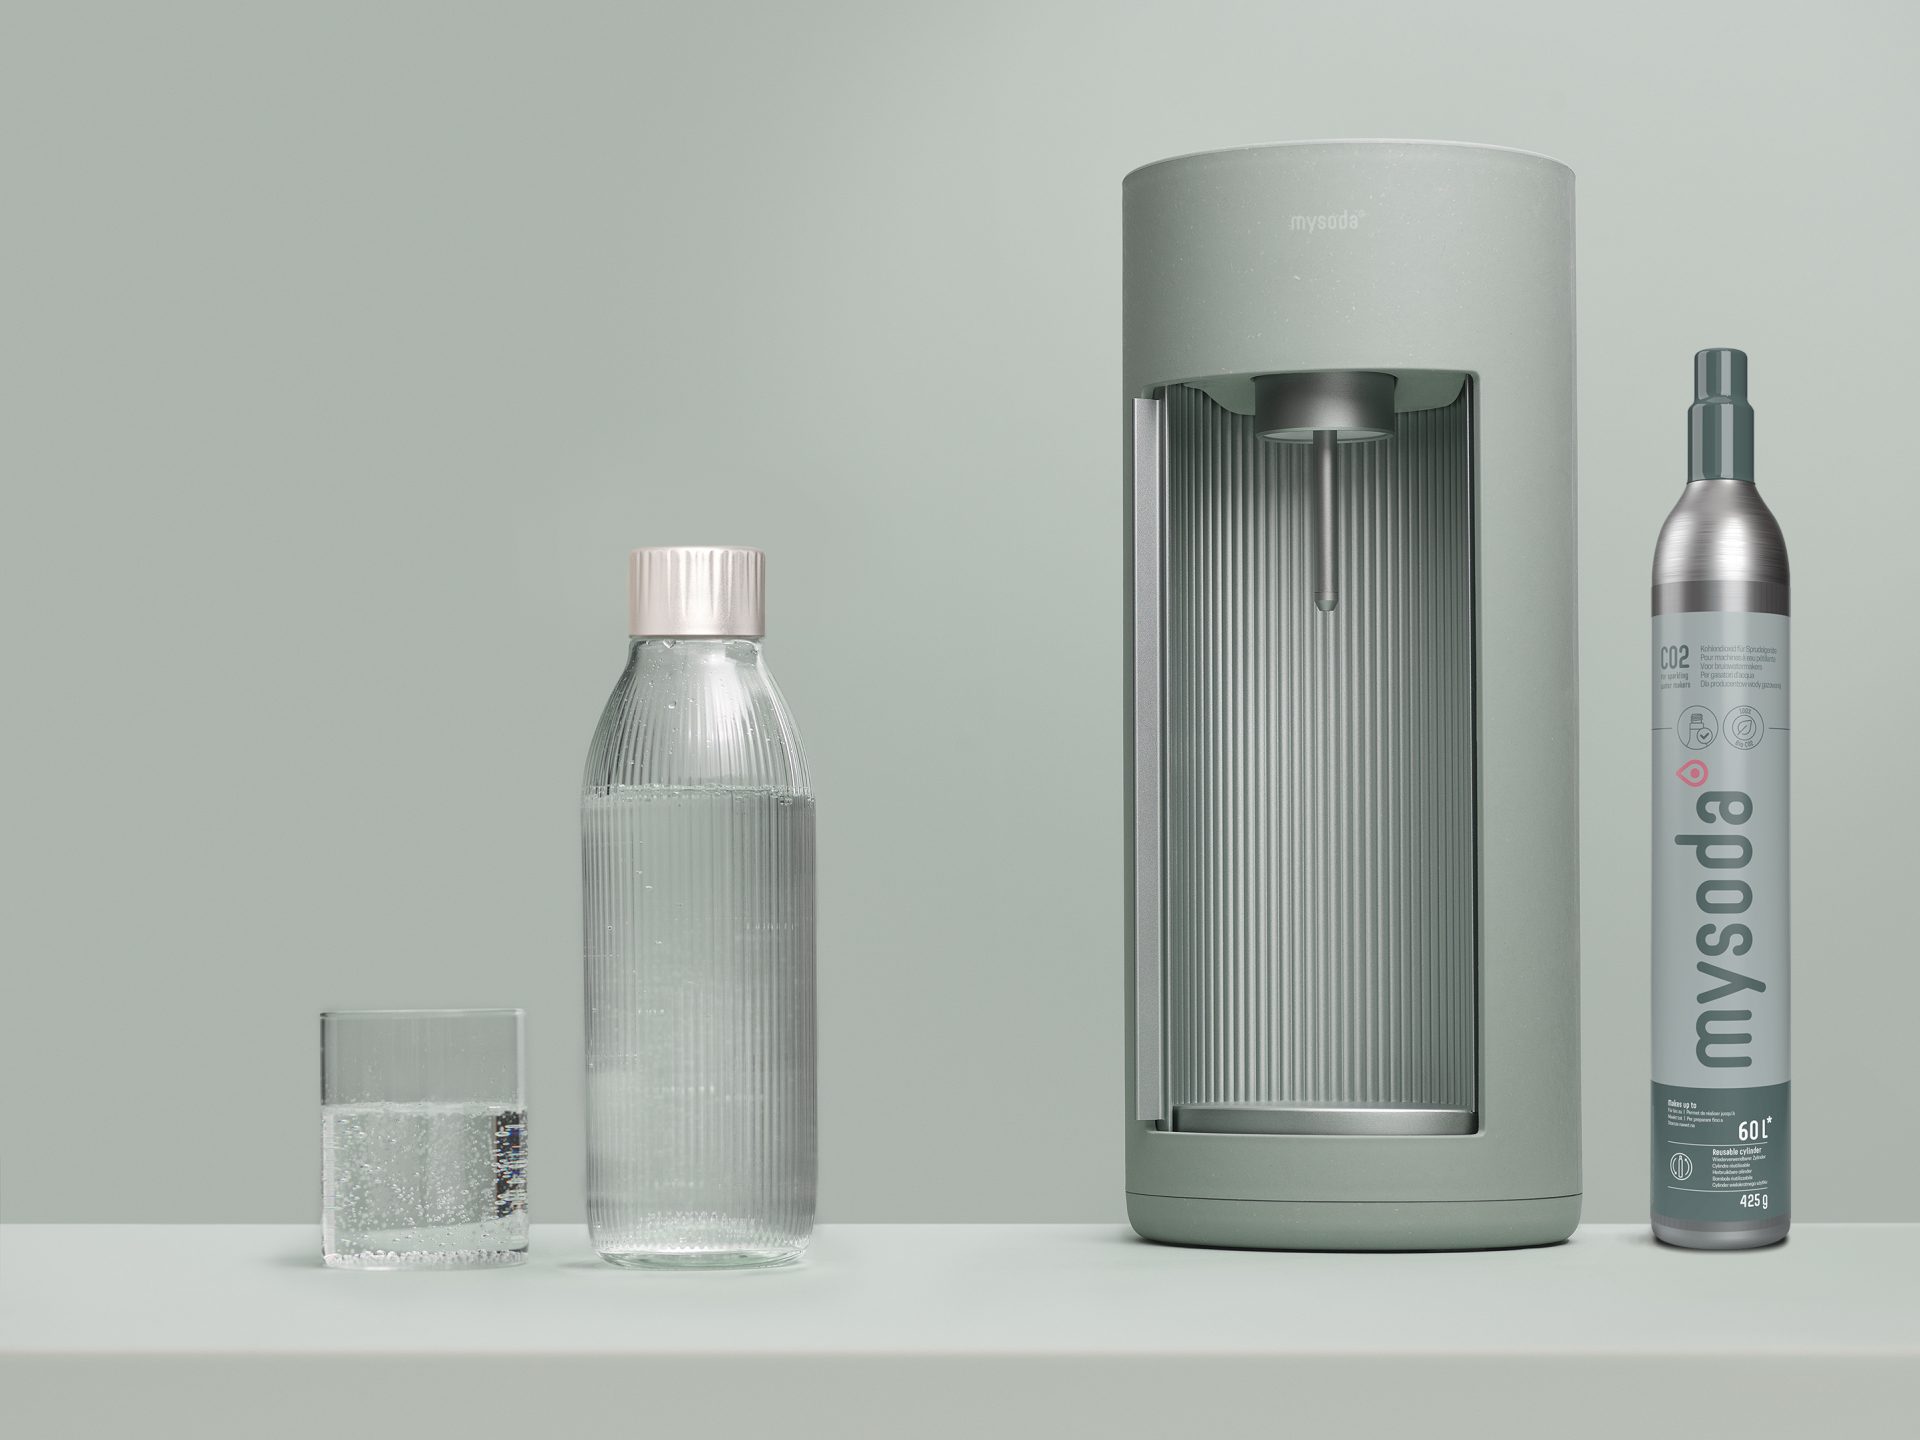 A pigeon coloured Glassy sparkling water maker, a CO2 cylinder with sleeve in similar colours, and a glass bottle in front of tone-to-tone background